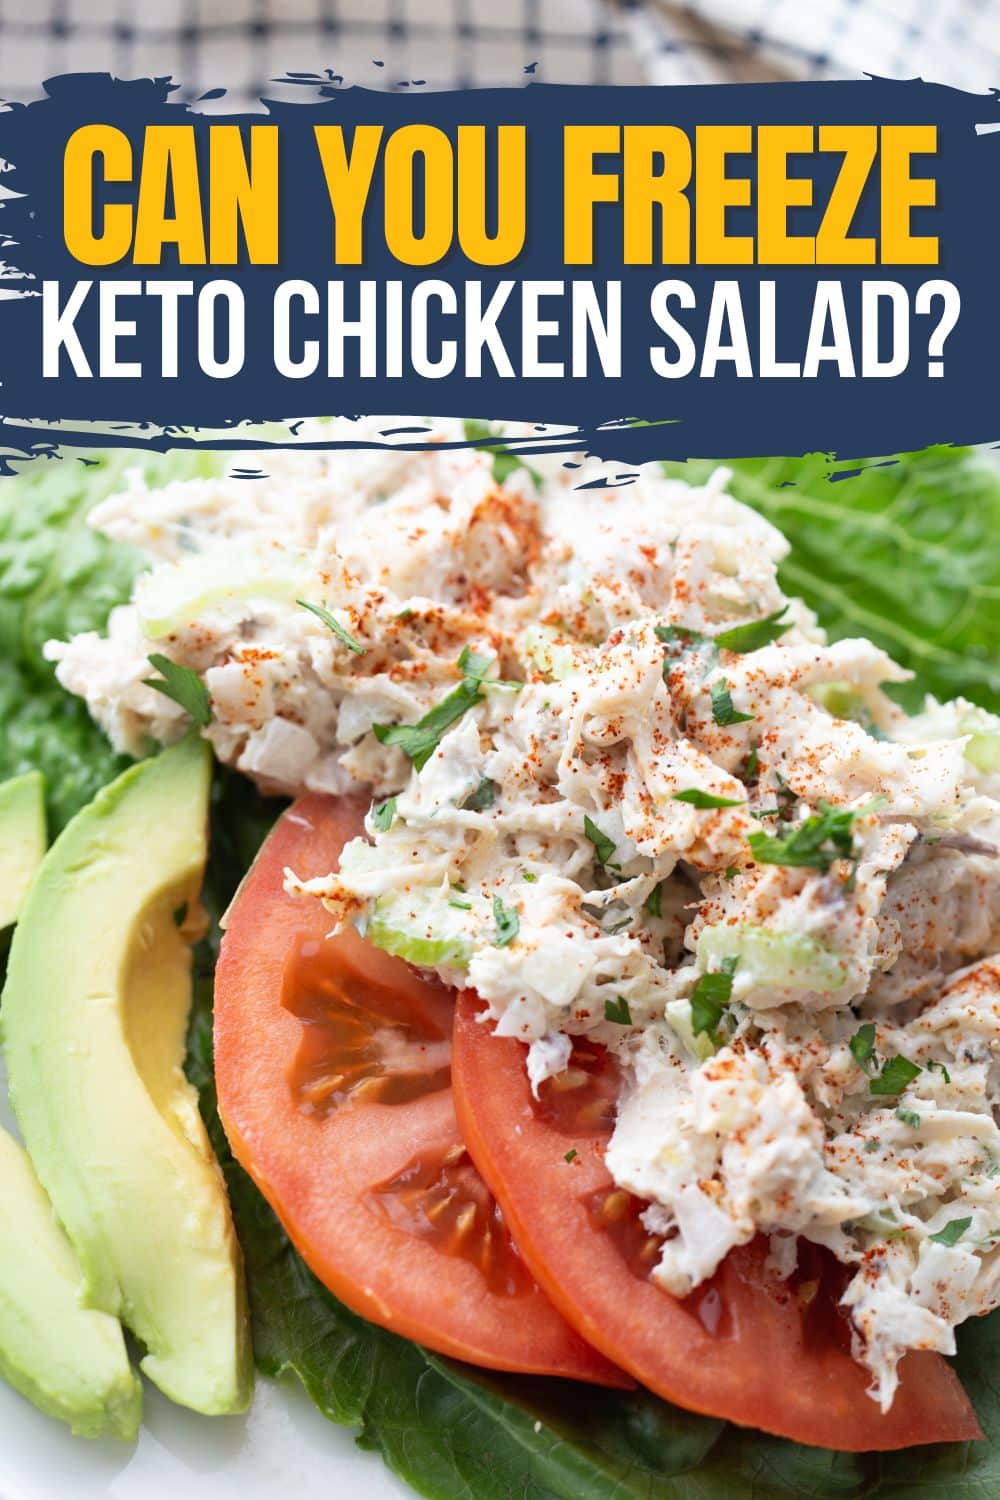 Bowl of keto chicken salad with lettuce, tomato, avocado, and shredded chicken topped with bacon